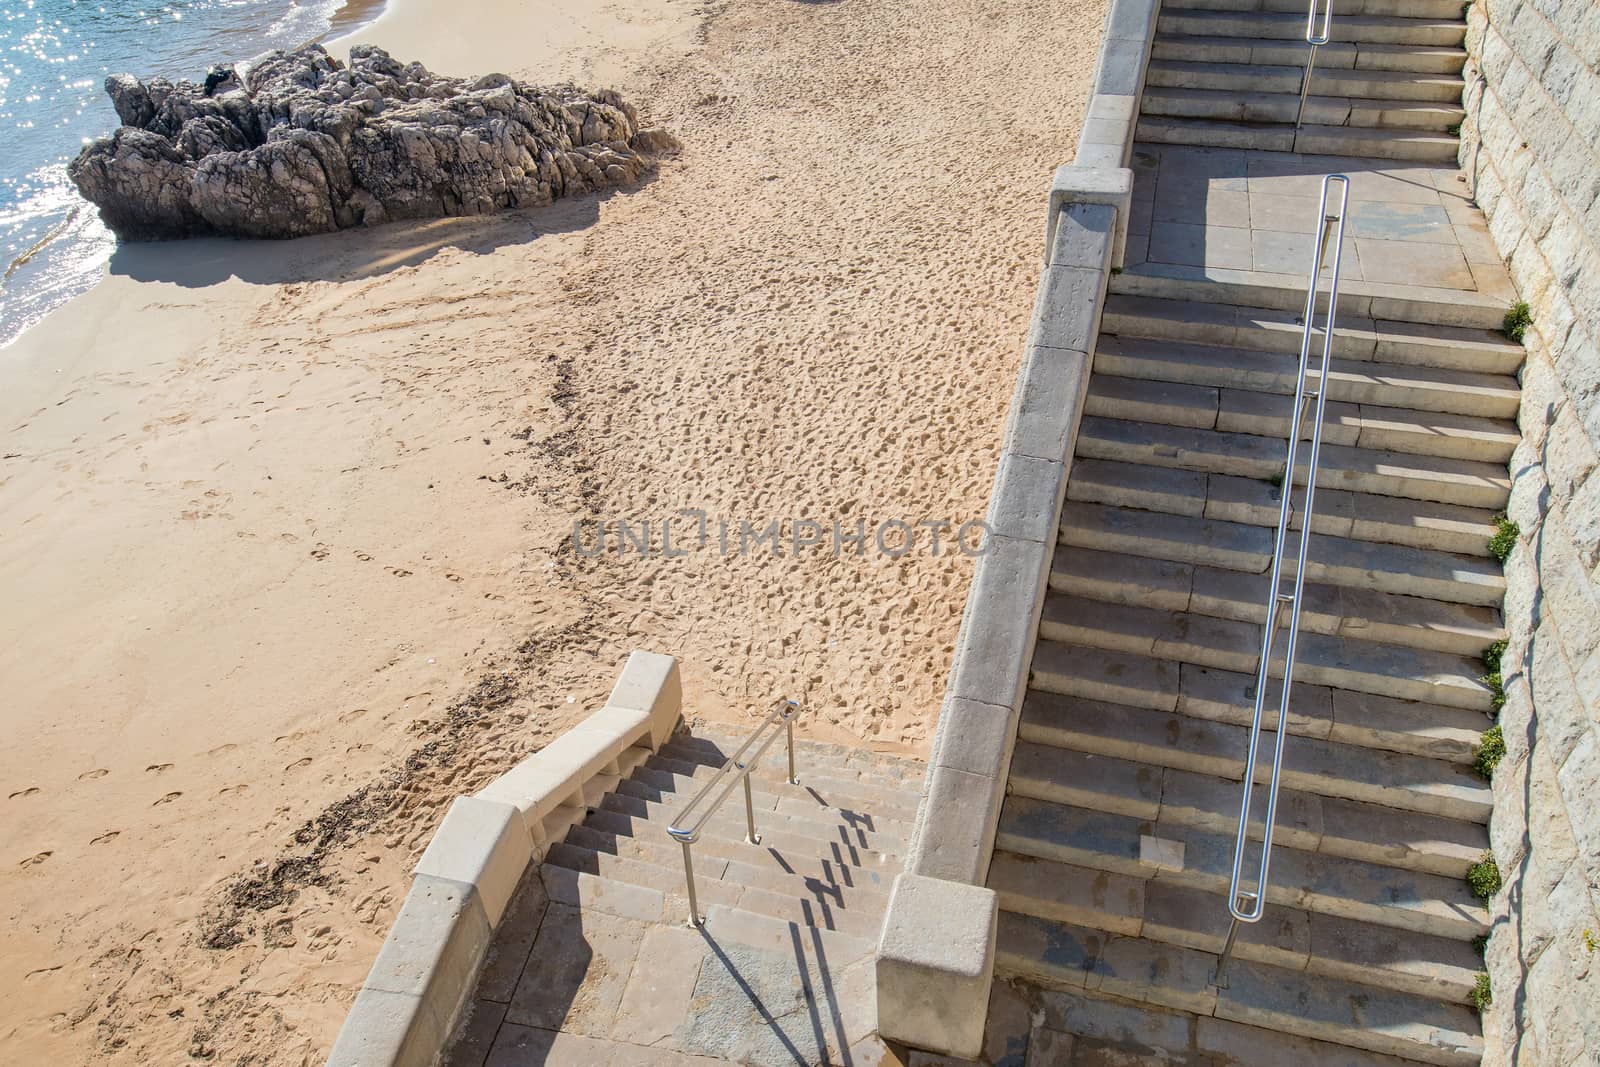 two flights of stairs to access a fine sand beach with a rock just at the edge of the water